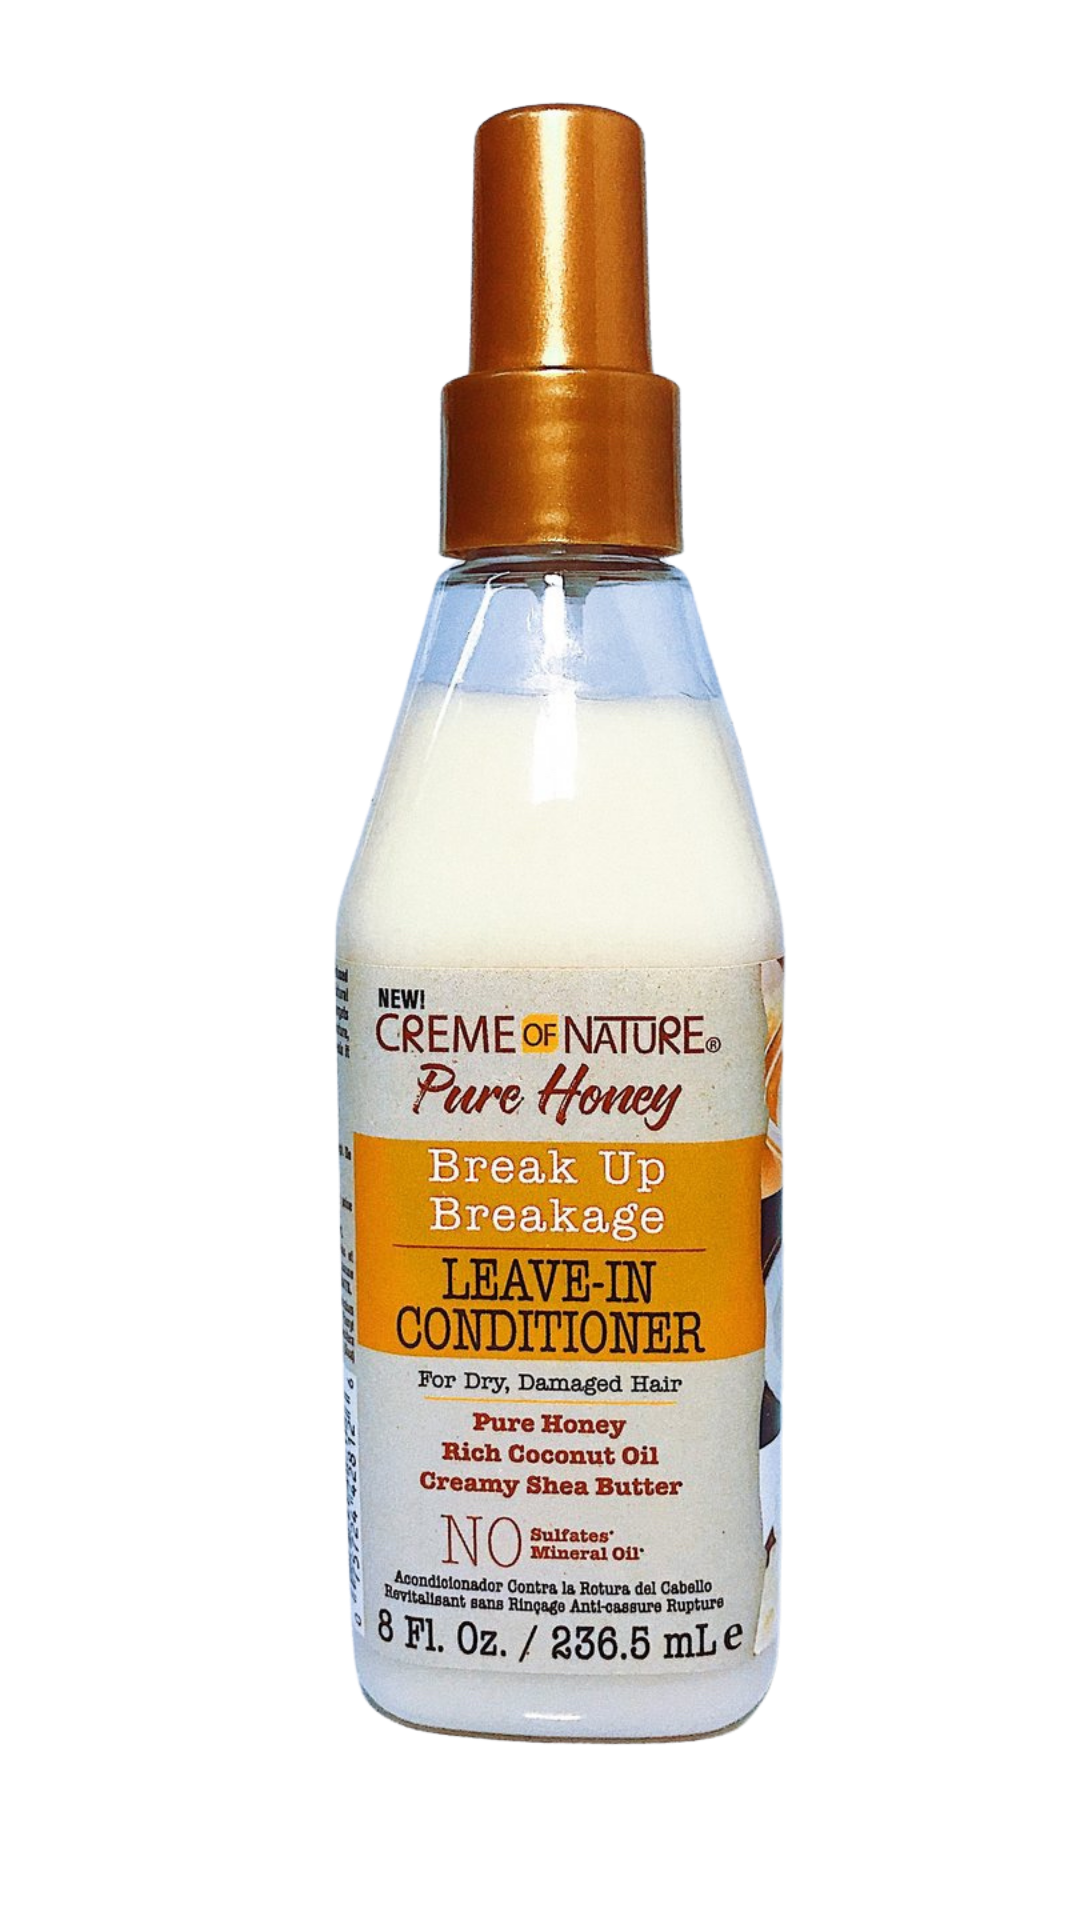 Creme Of Nature Pure Honey Leave-In Conditioner